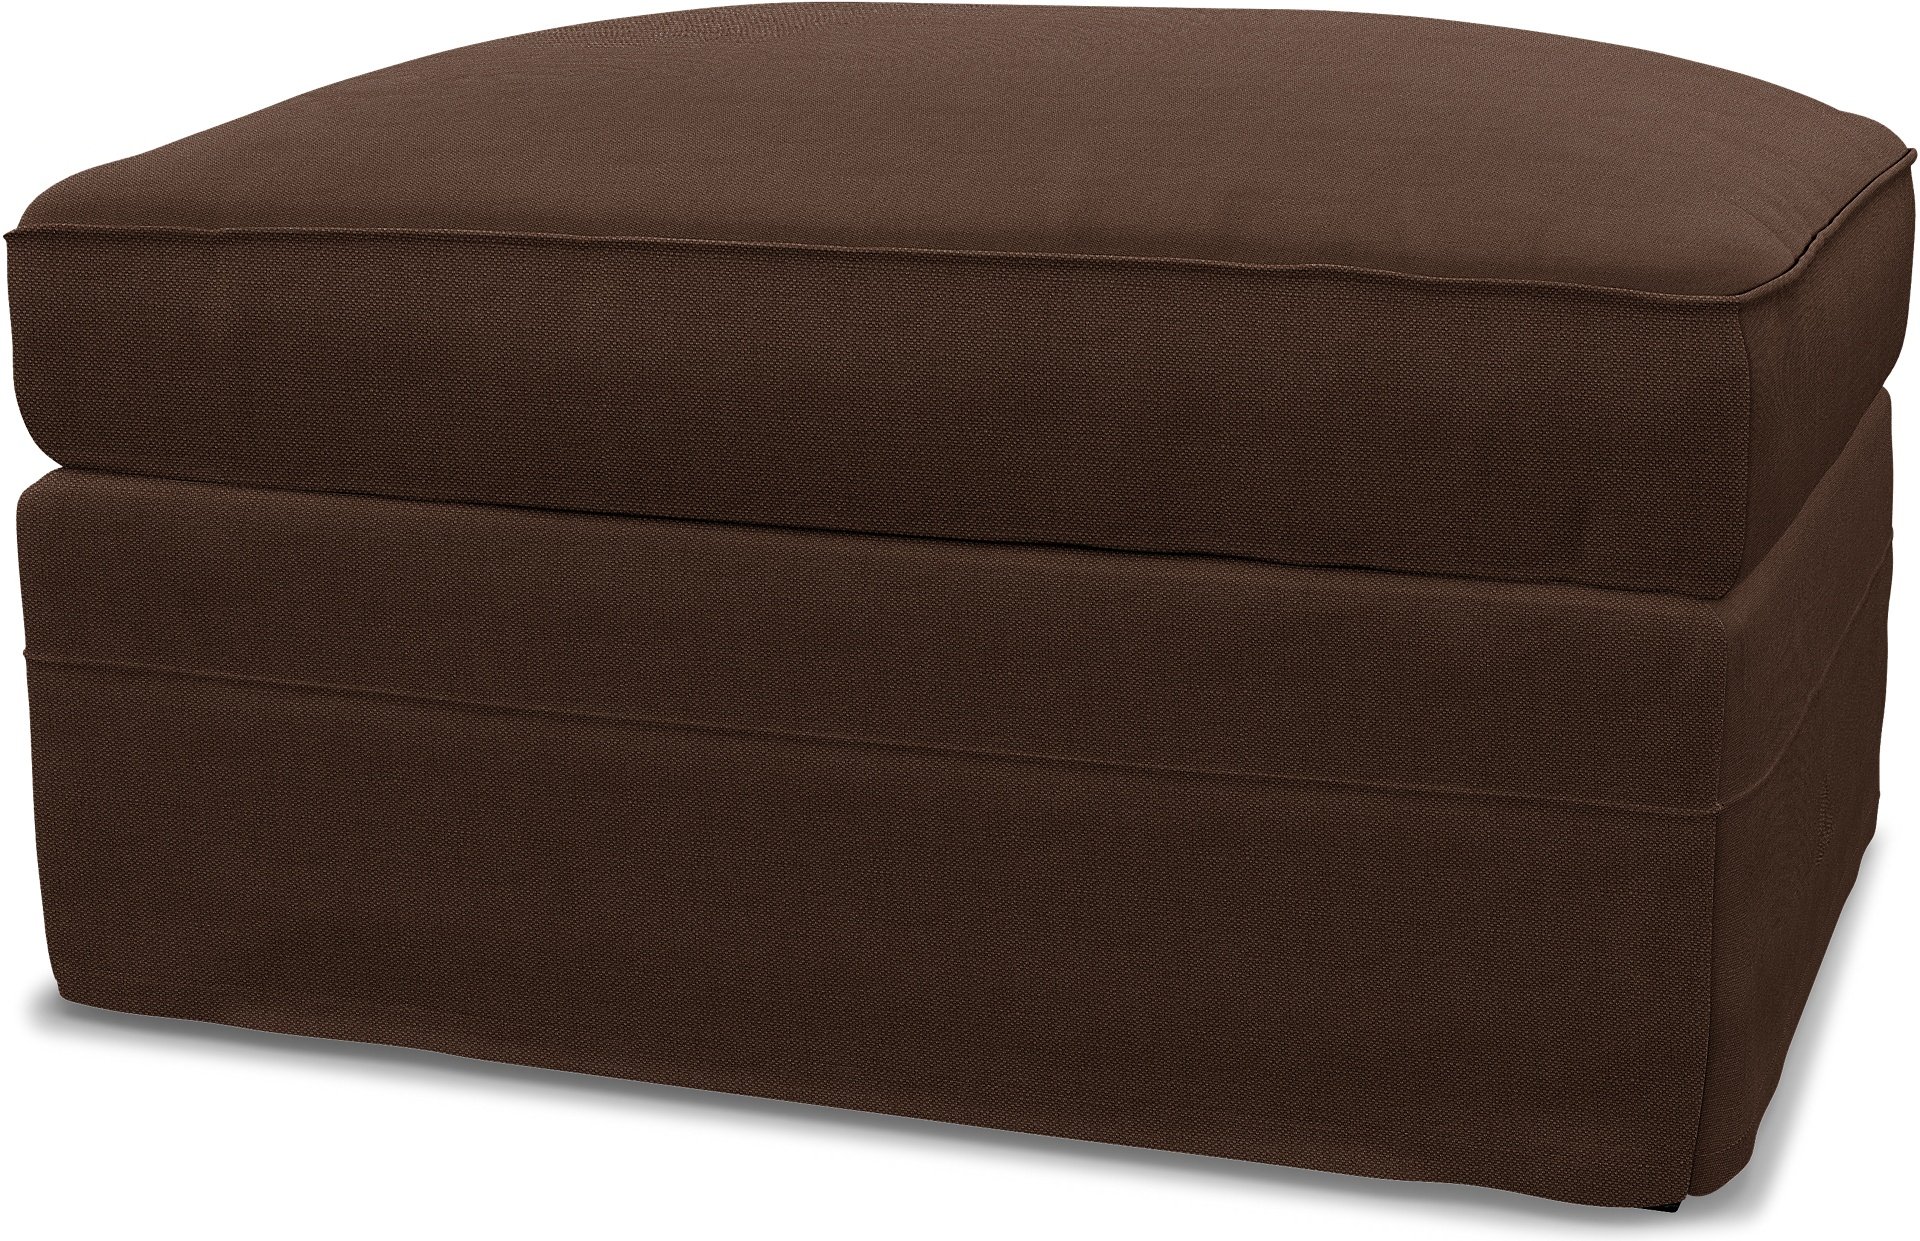 IKEA - Gronlid Footstool with Storage Cover, Chocolate, Linen - Bemz